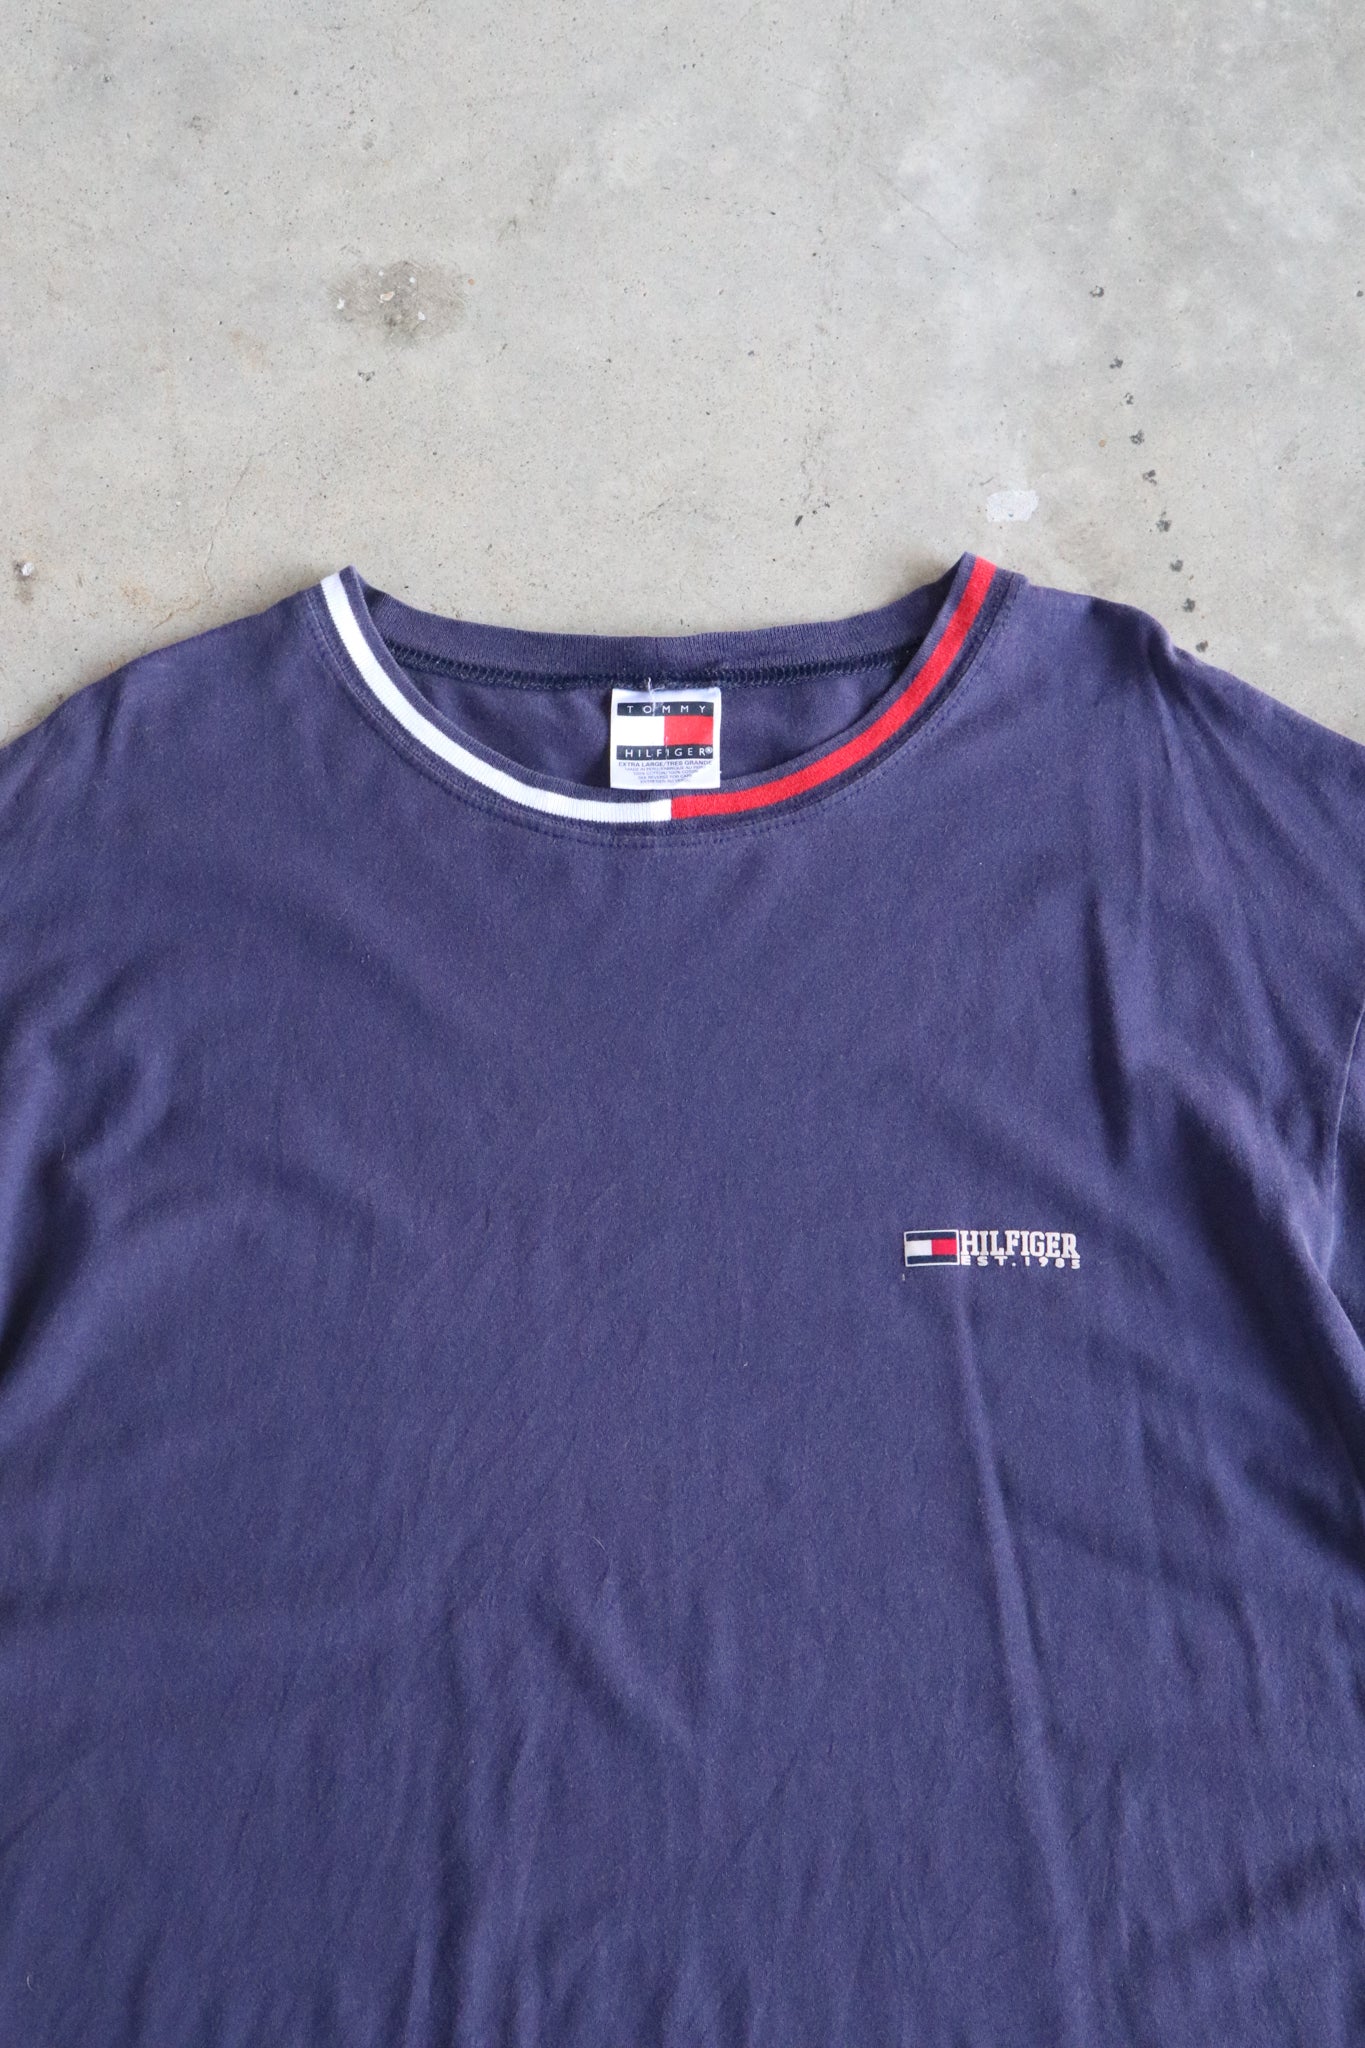 Vintage Tommy Hilfiger Spell Out Tee XL